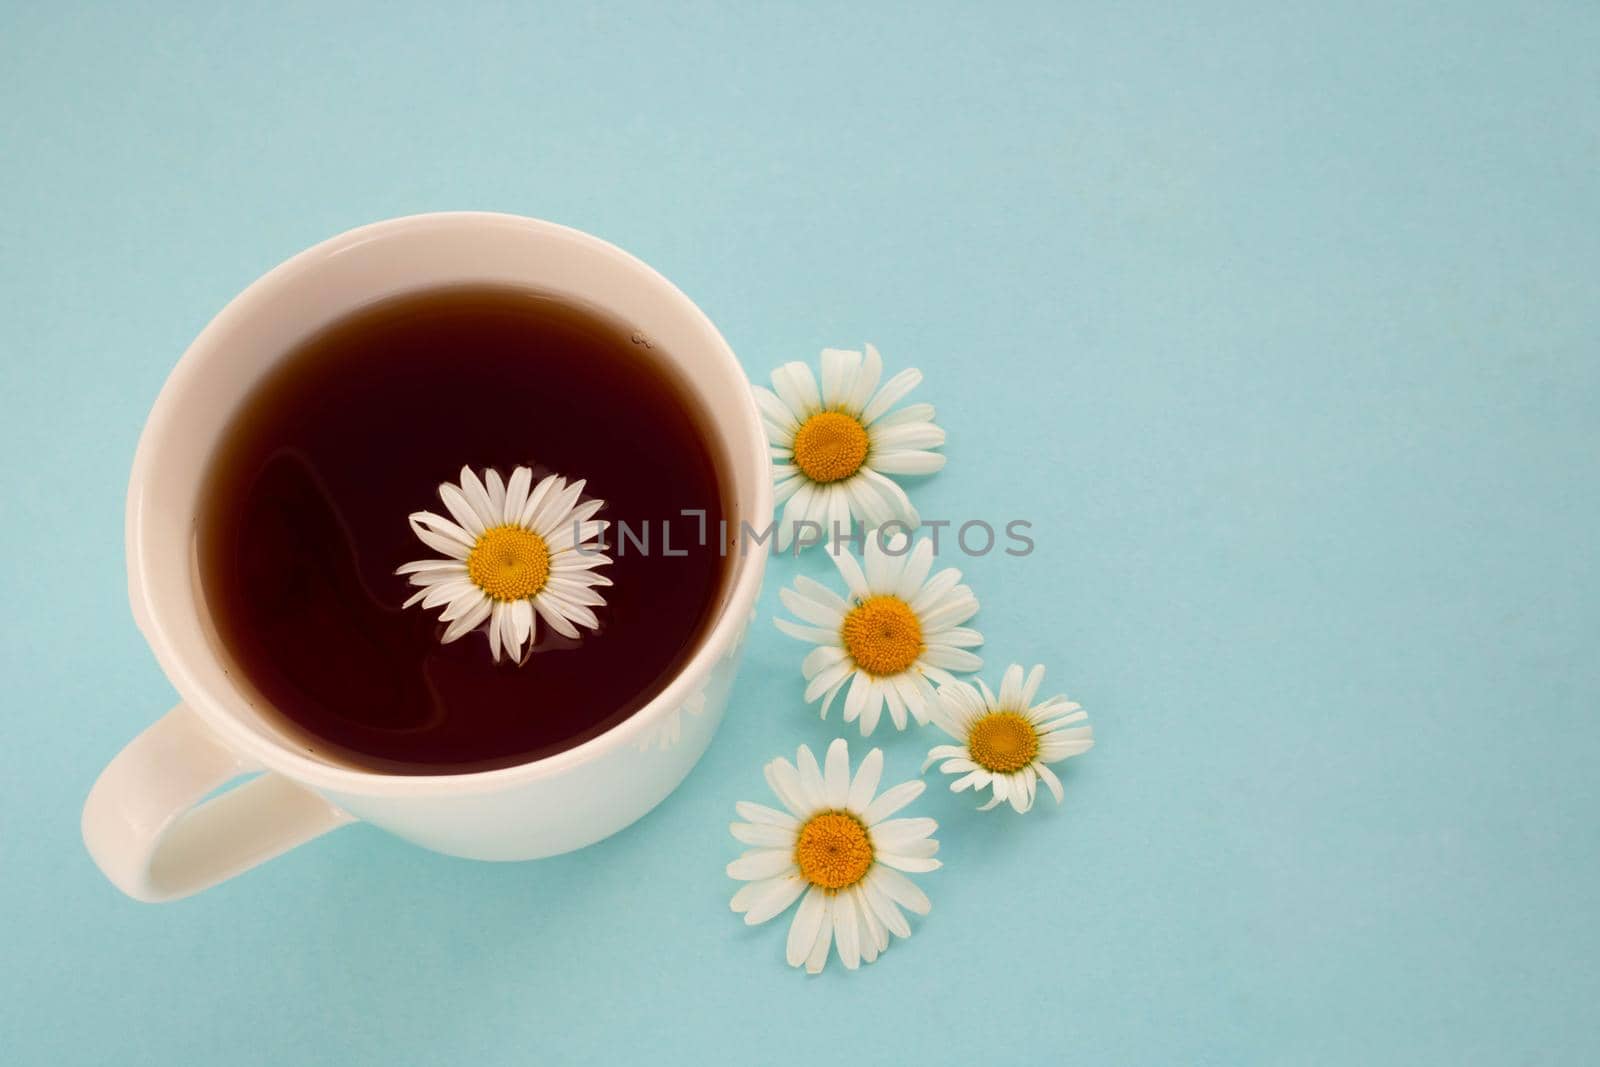 Chamomile tea. On a blue background, a white cup with tea and daisies